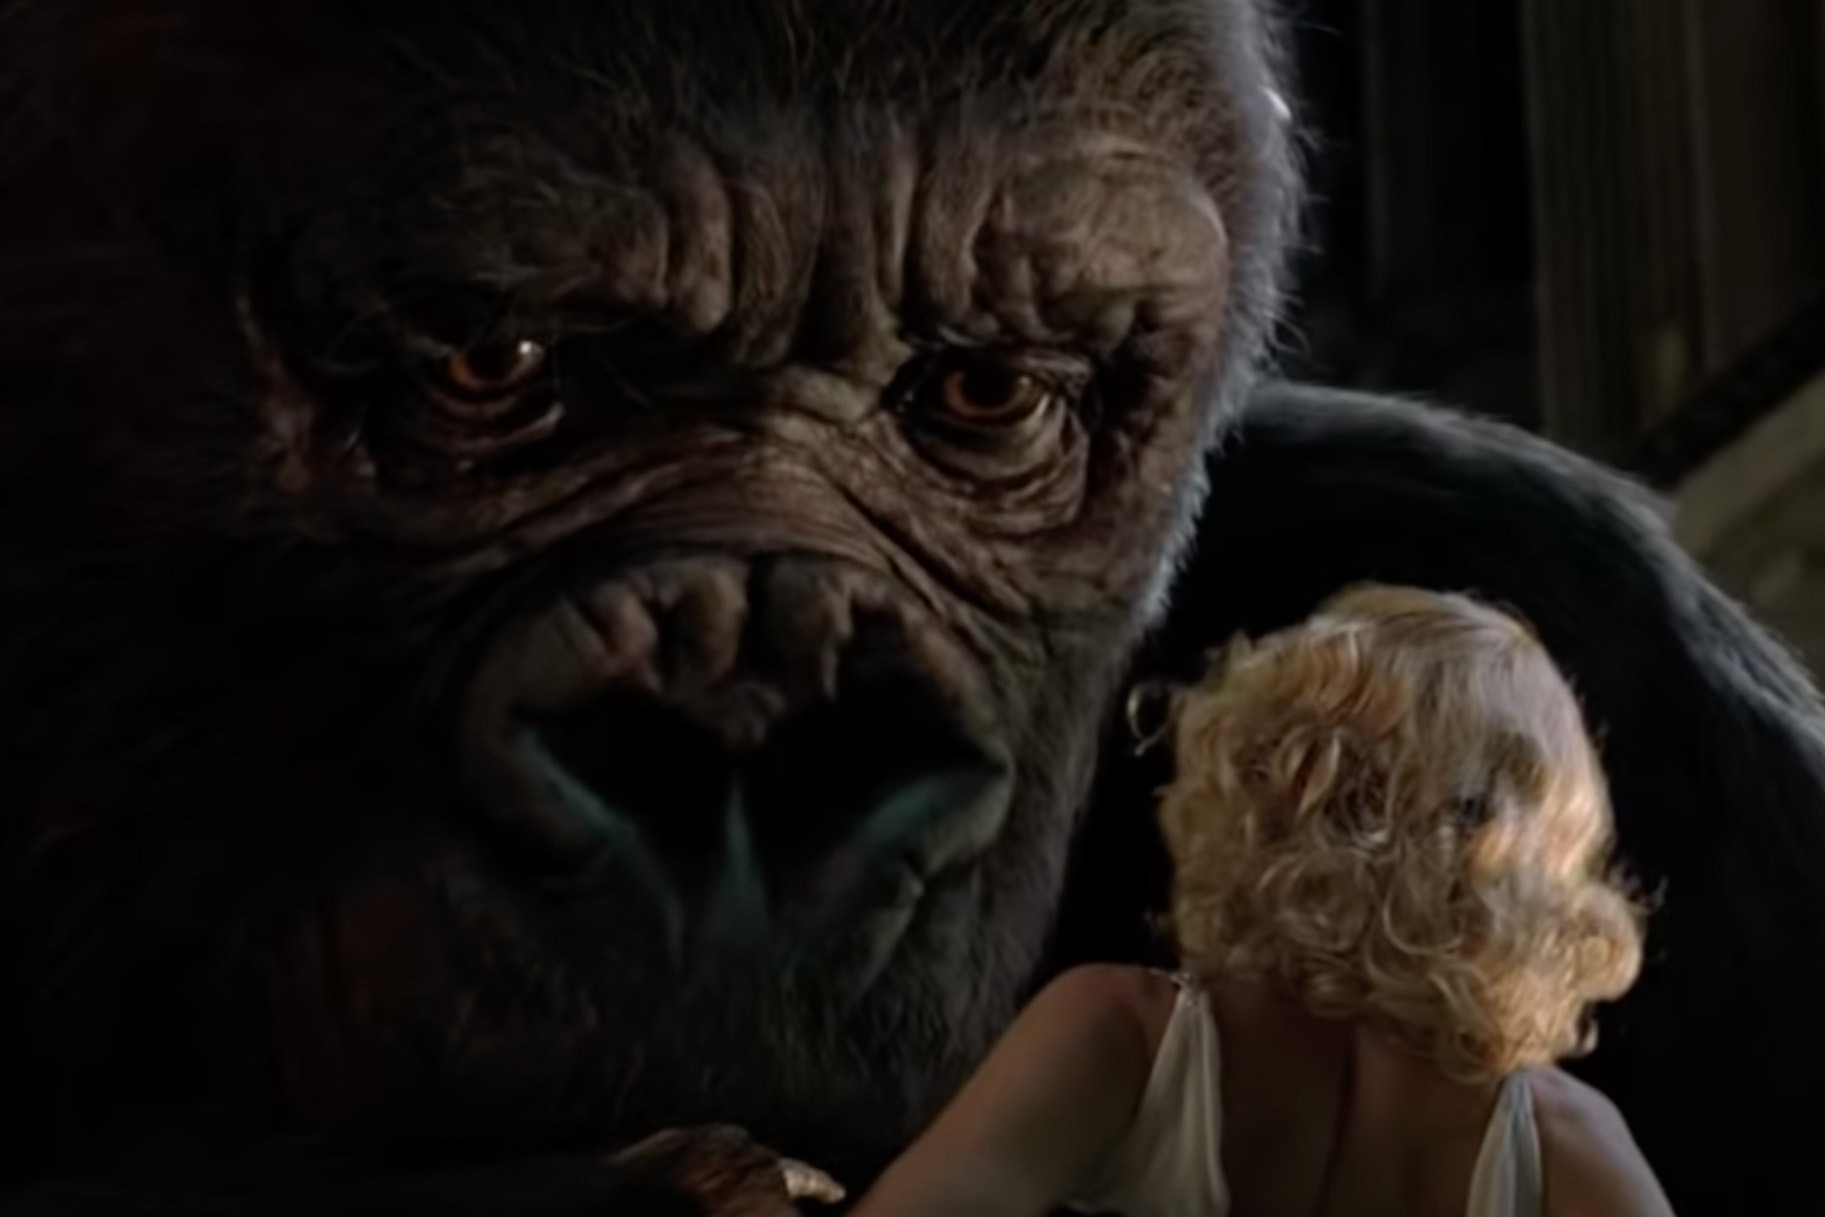 Peter Jackson’s ‘King Kong’ remains an underrated wonder of the world